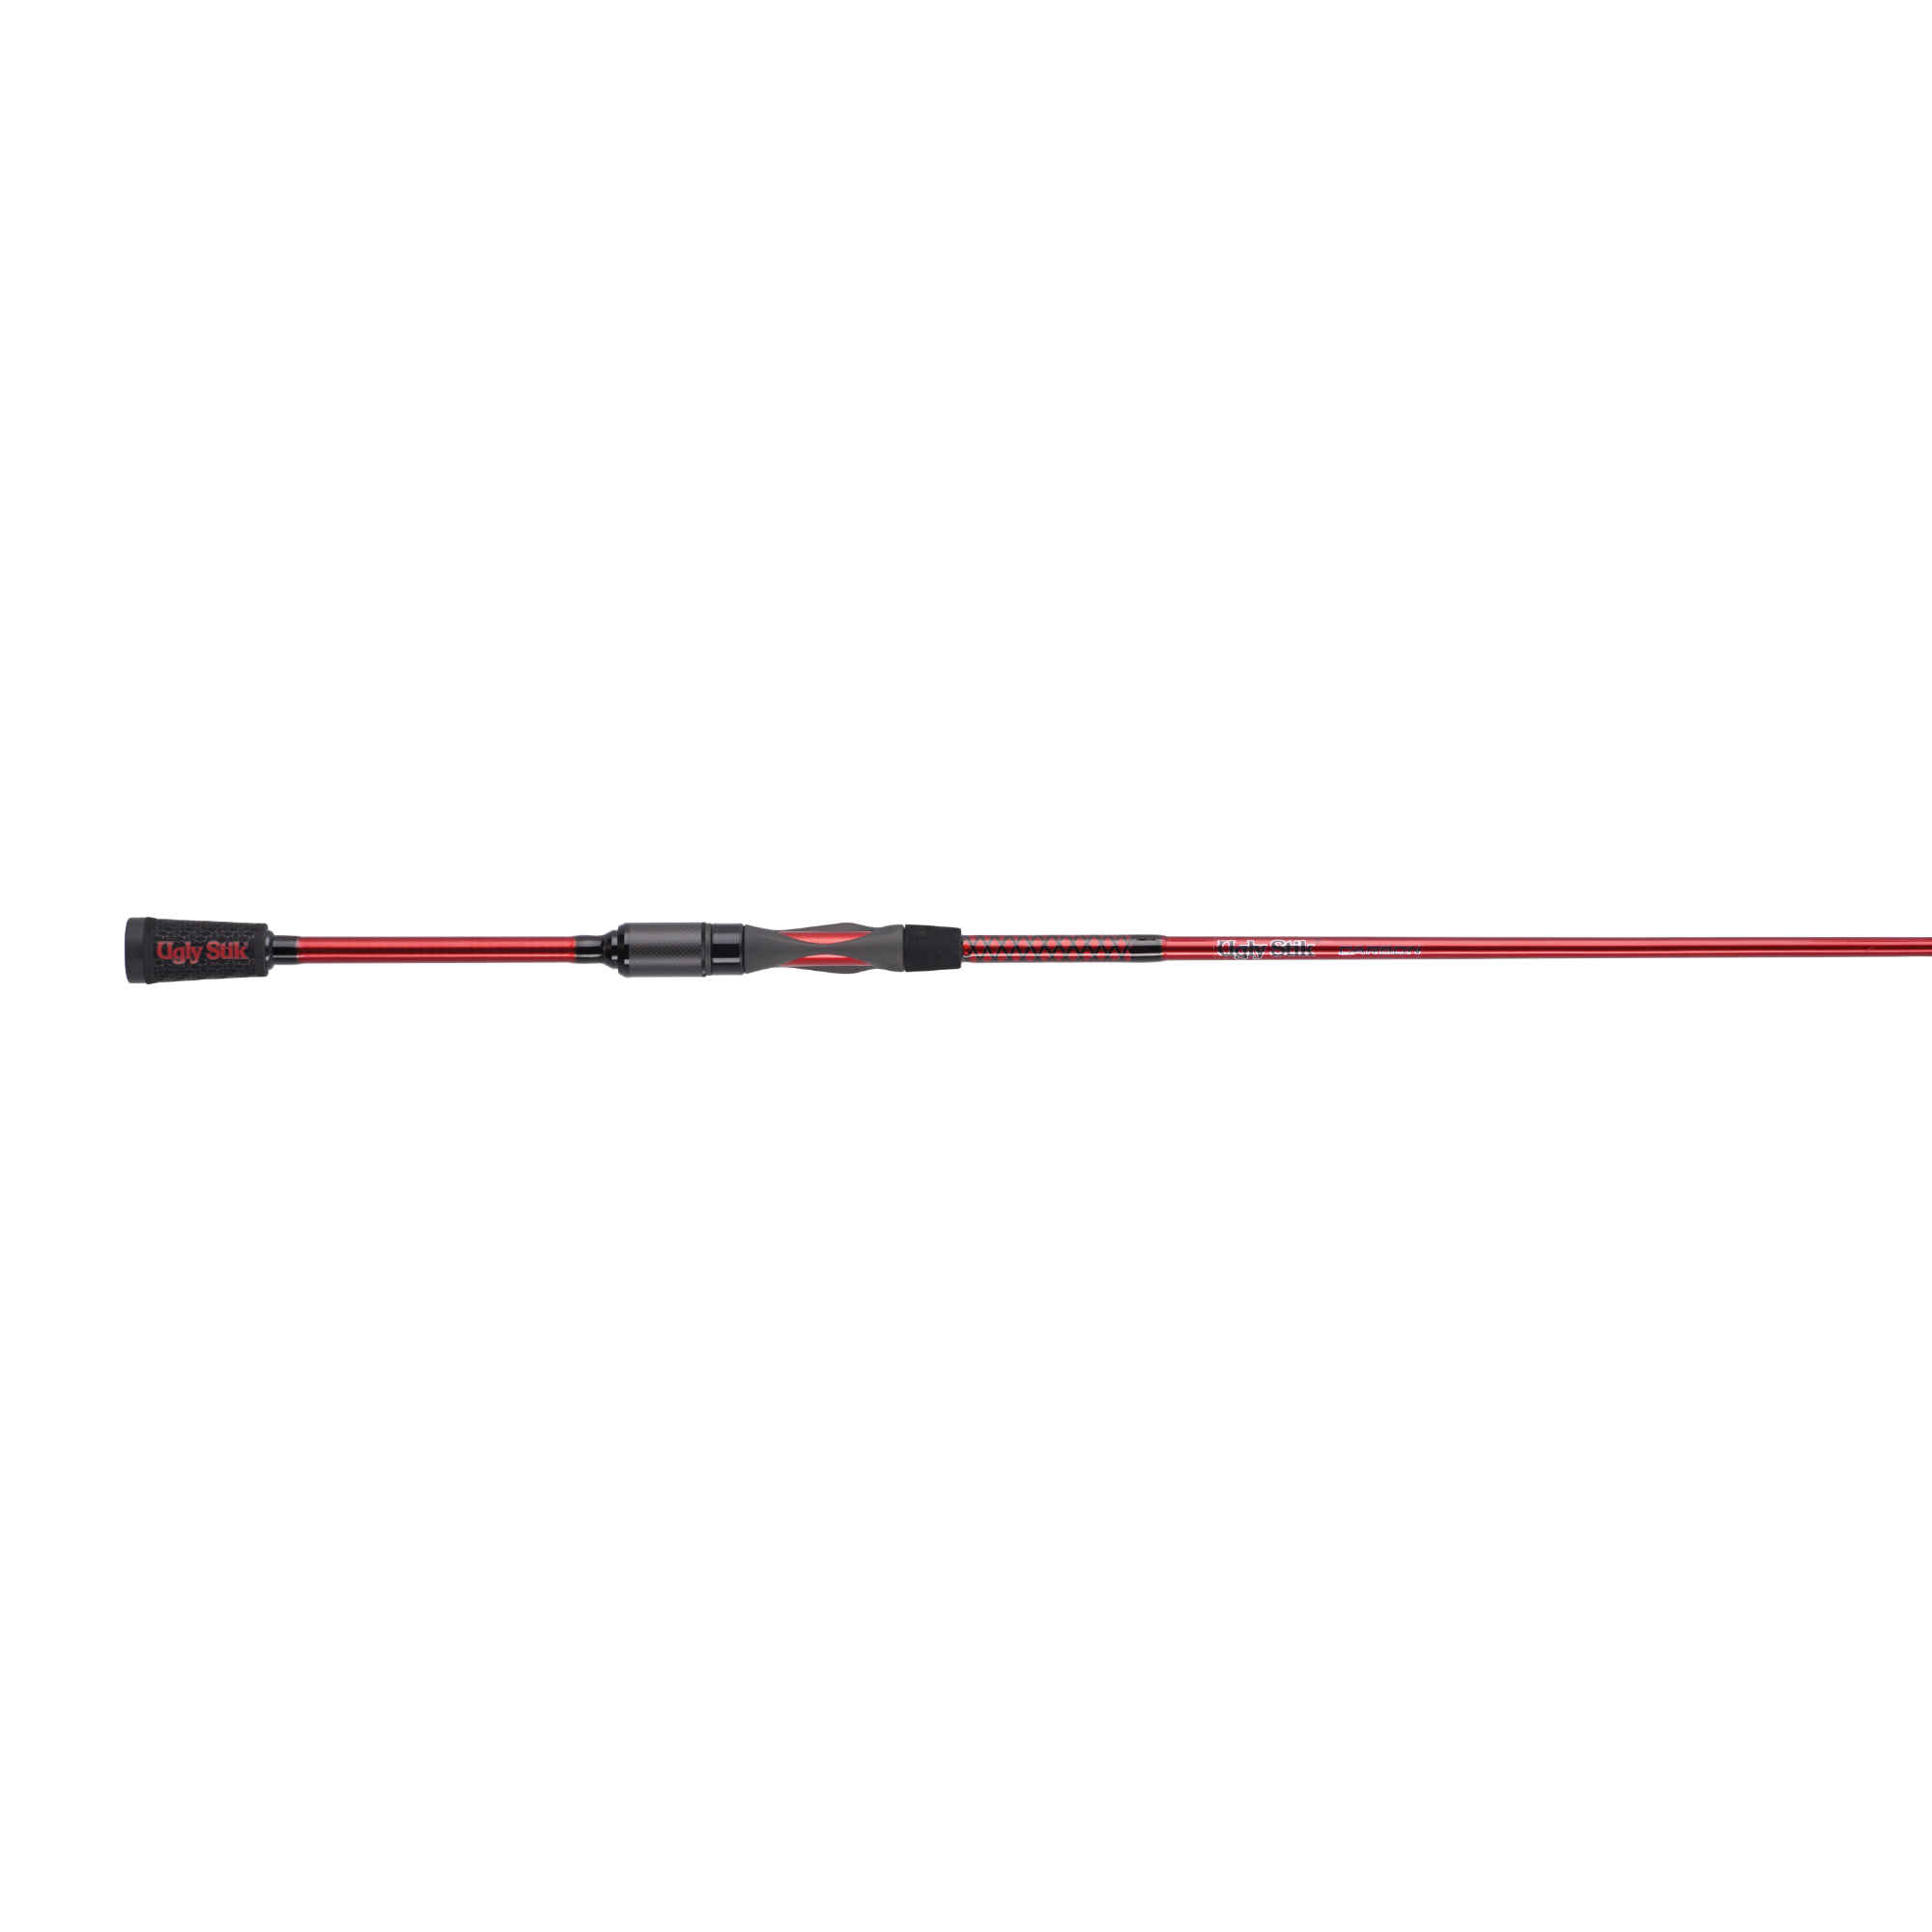 Ugly Stik Carbon Spinning Rod, 2 Piece, Ultra-Light, Moderate, 8 Guides,  1/32-1/8oz Lures